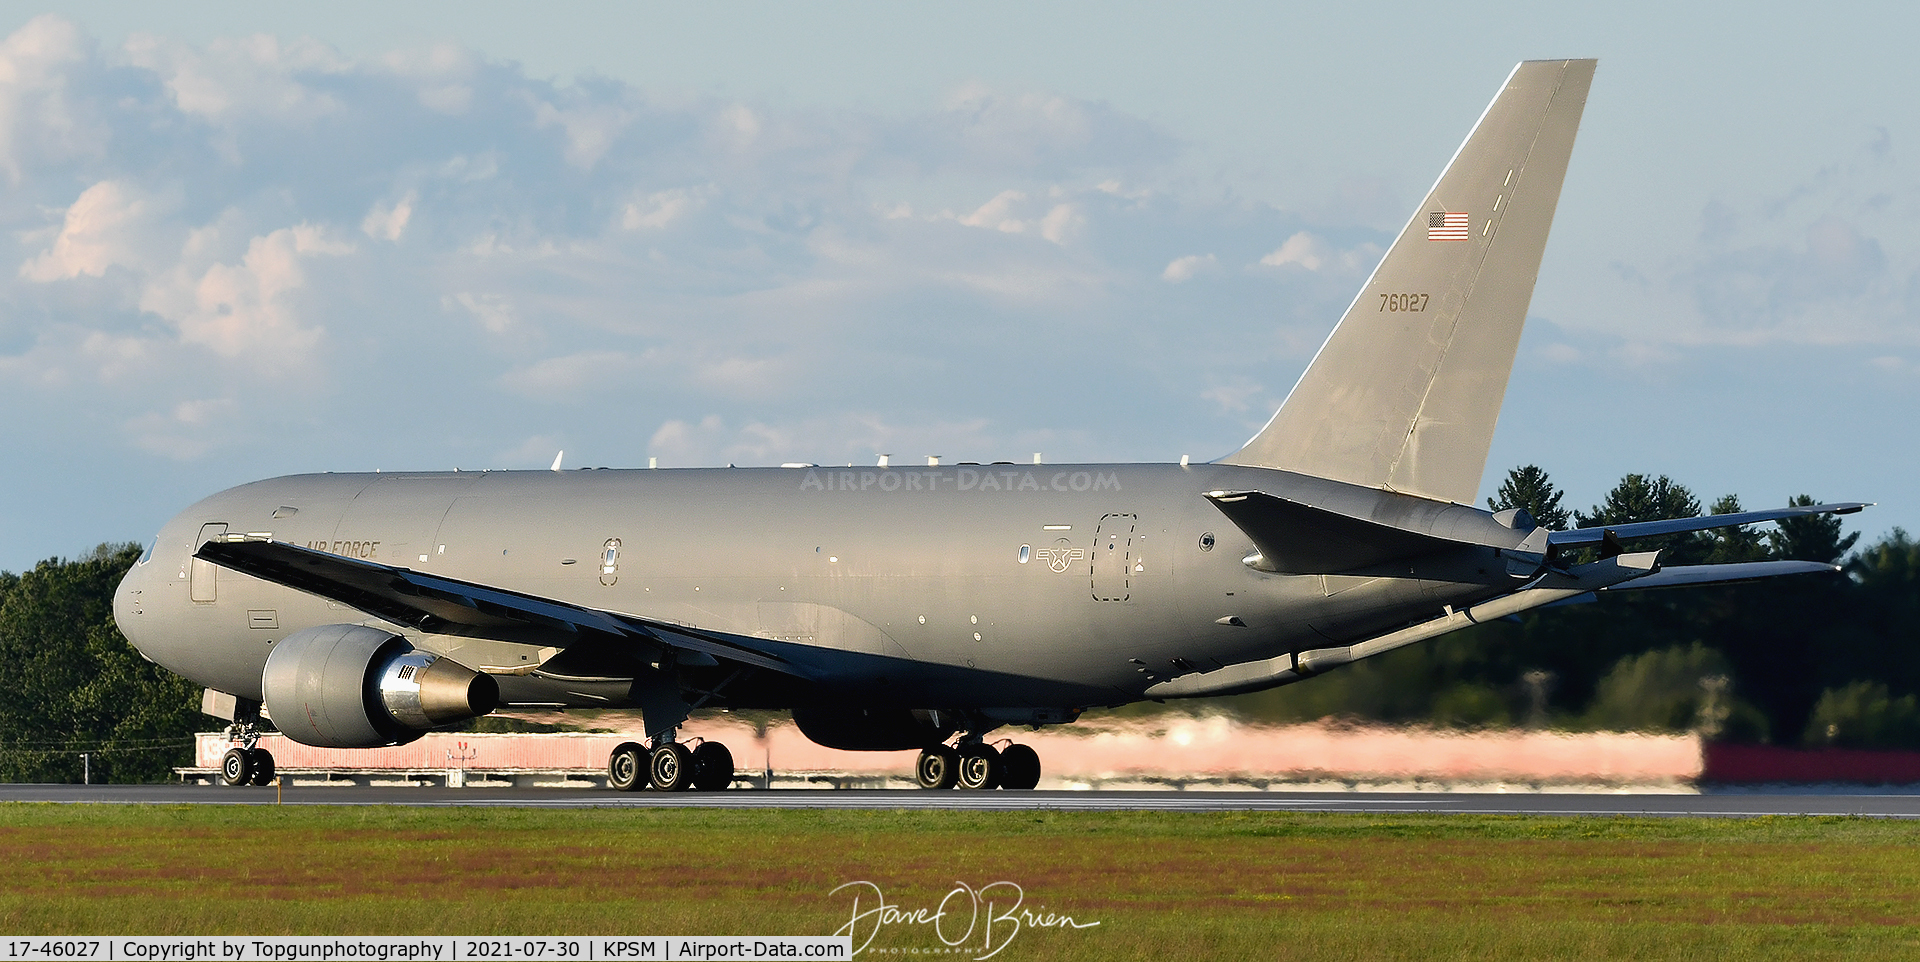 17-46027, 2019 Boeing KC-46A Pegasus (767-2LKC) C/N 34126, REACH303 of the 56th ARS out of Altus AFB departs Pease